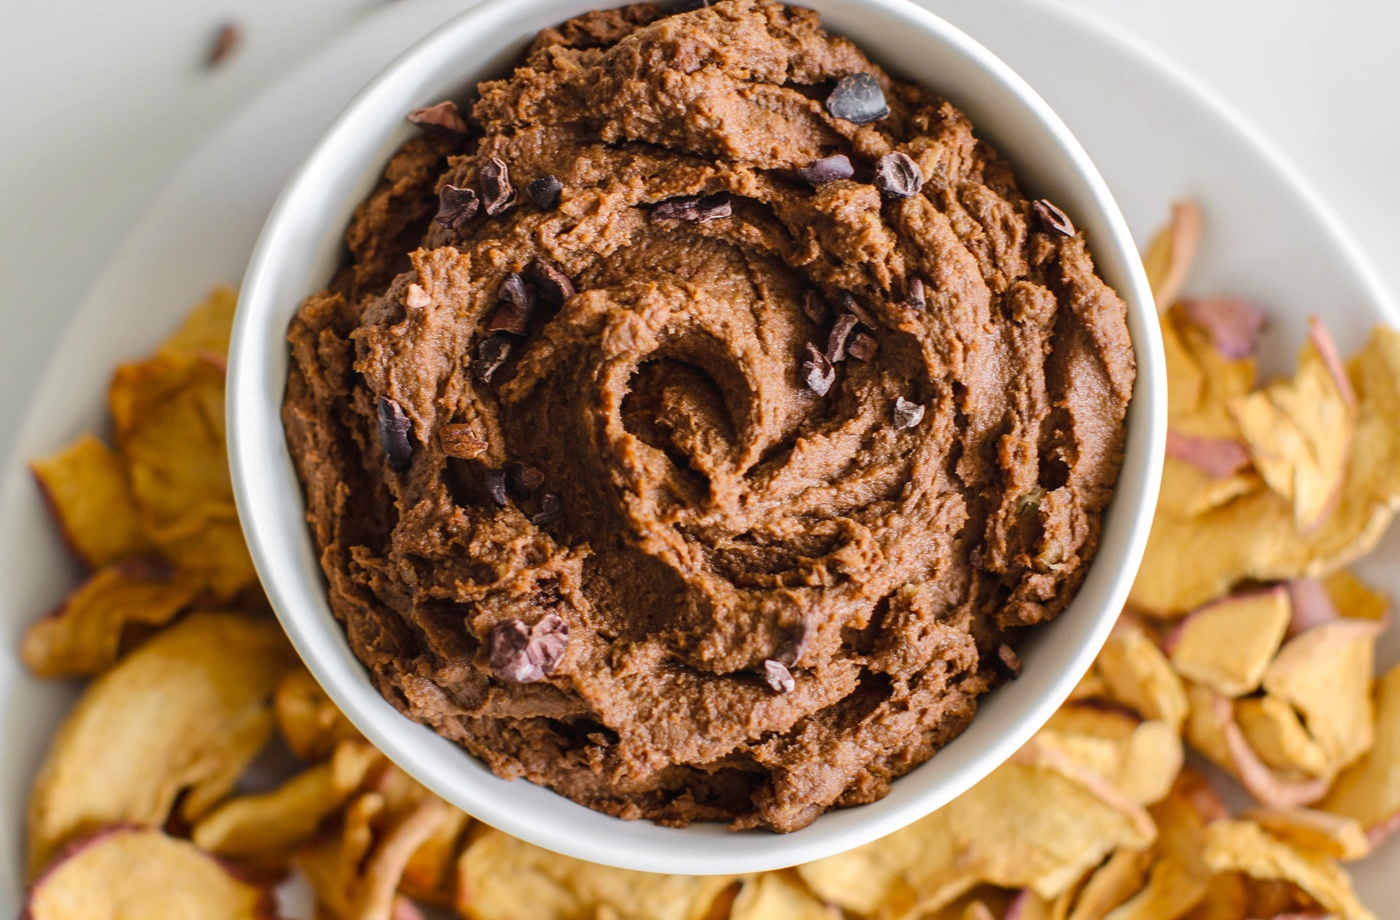 This chocolate hummus belongs at *all* your holiday parties